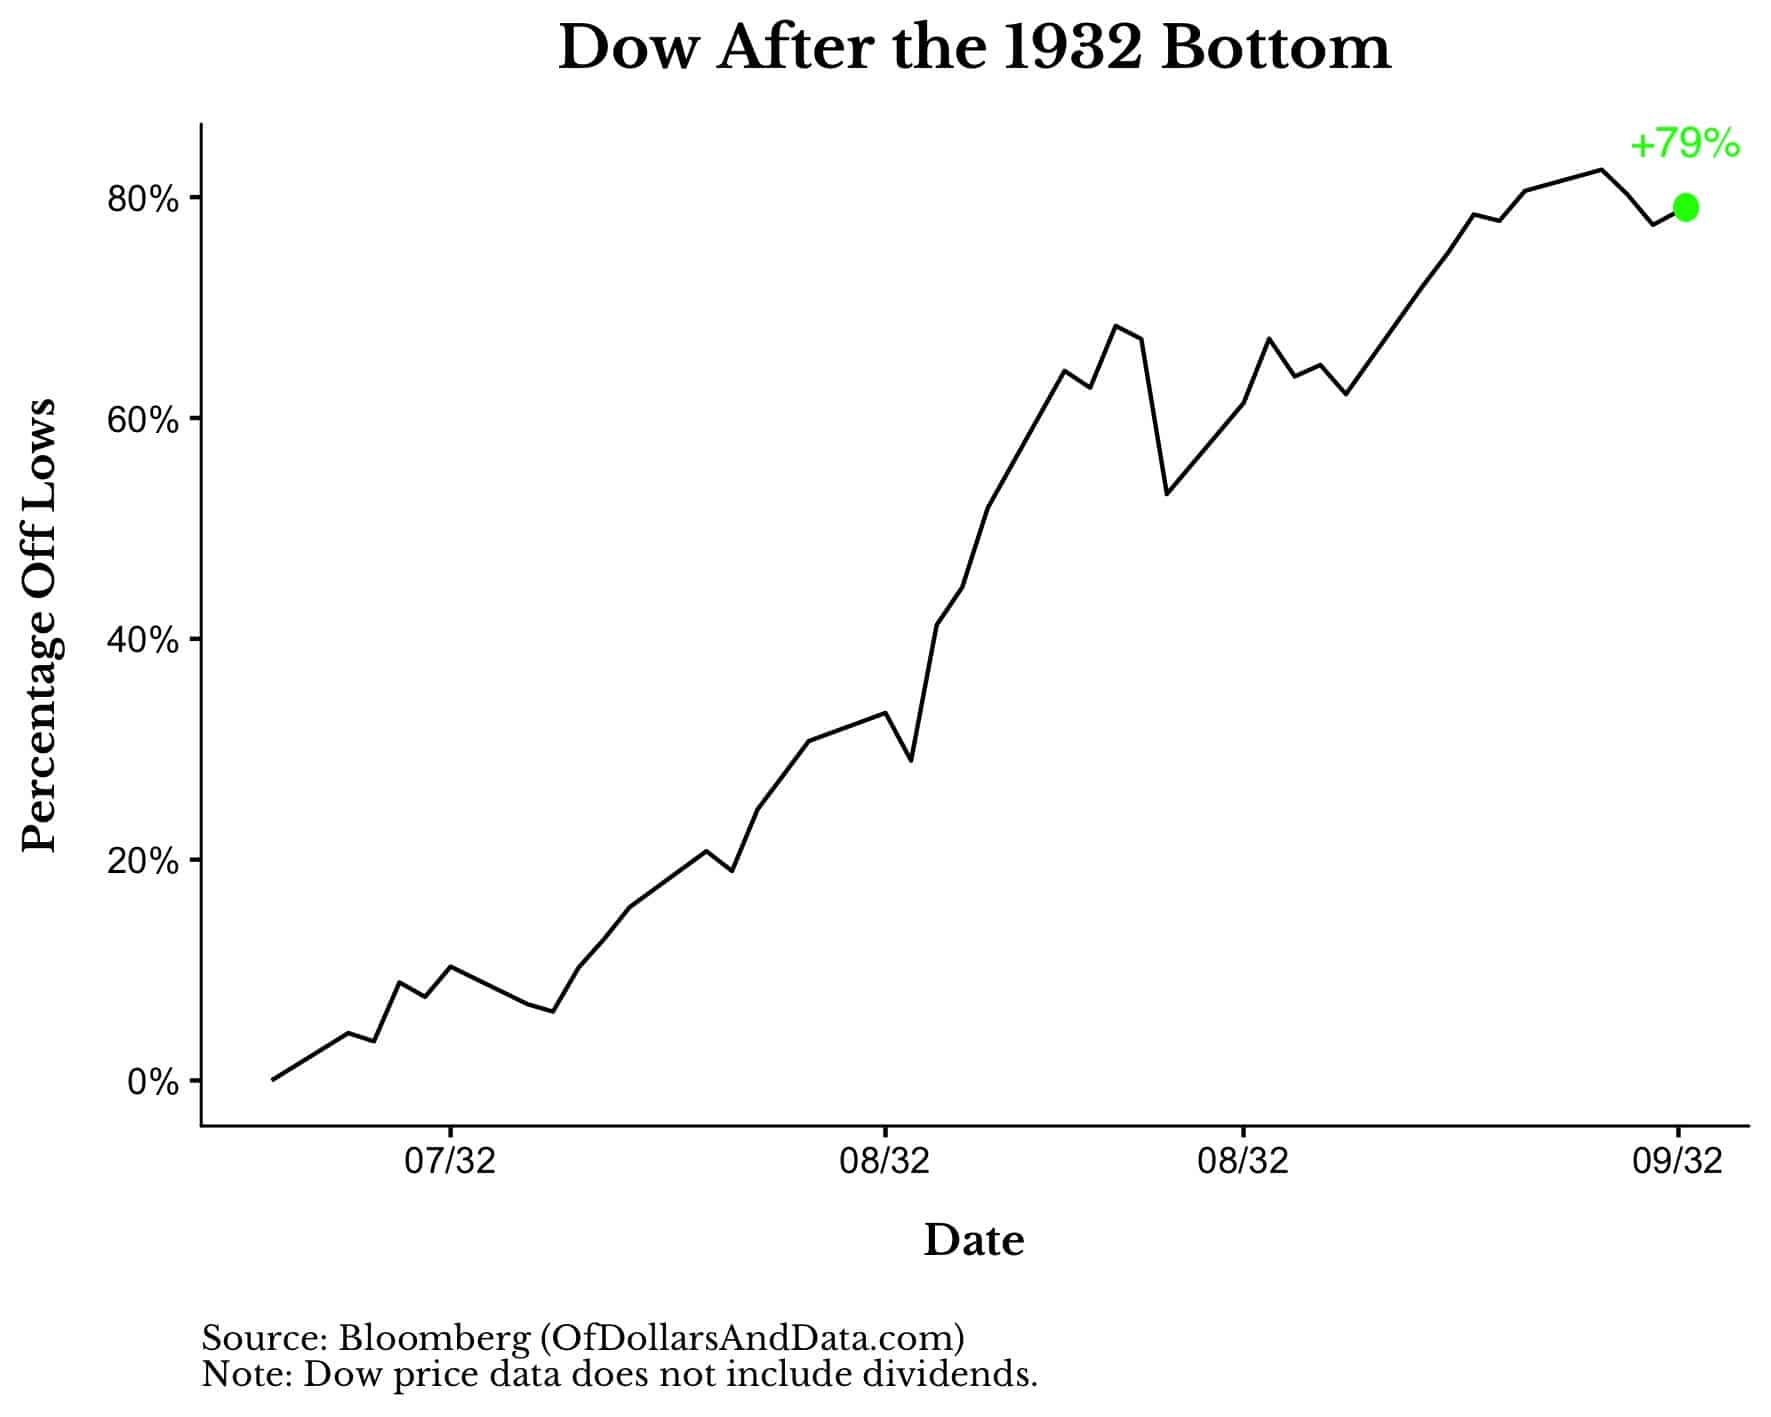 The Dow Jones Industrial Average following the 1932 bottom